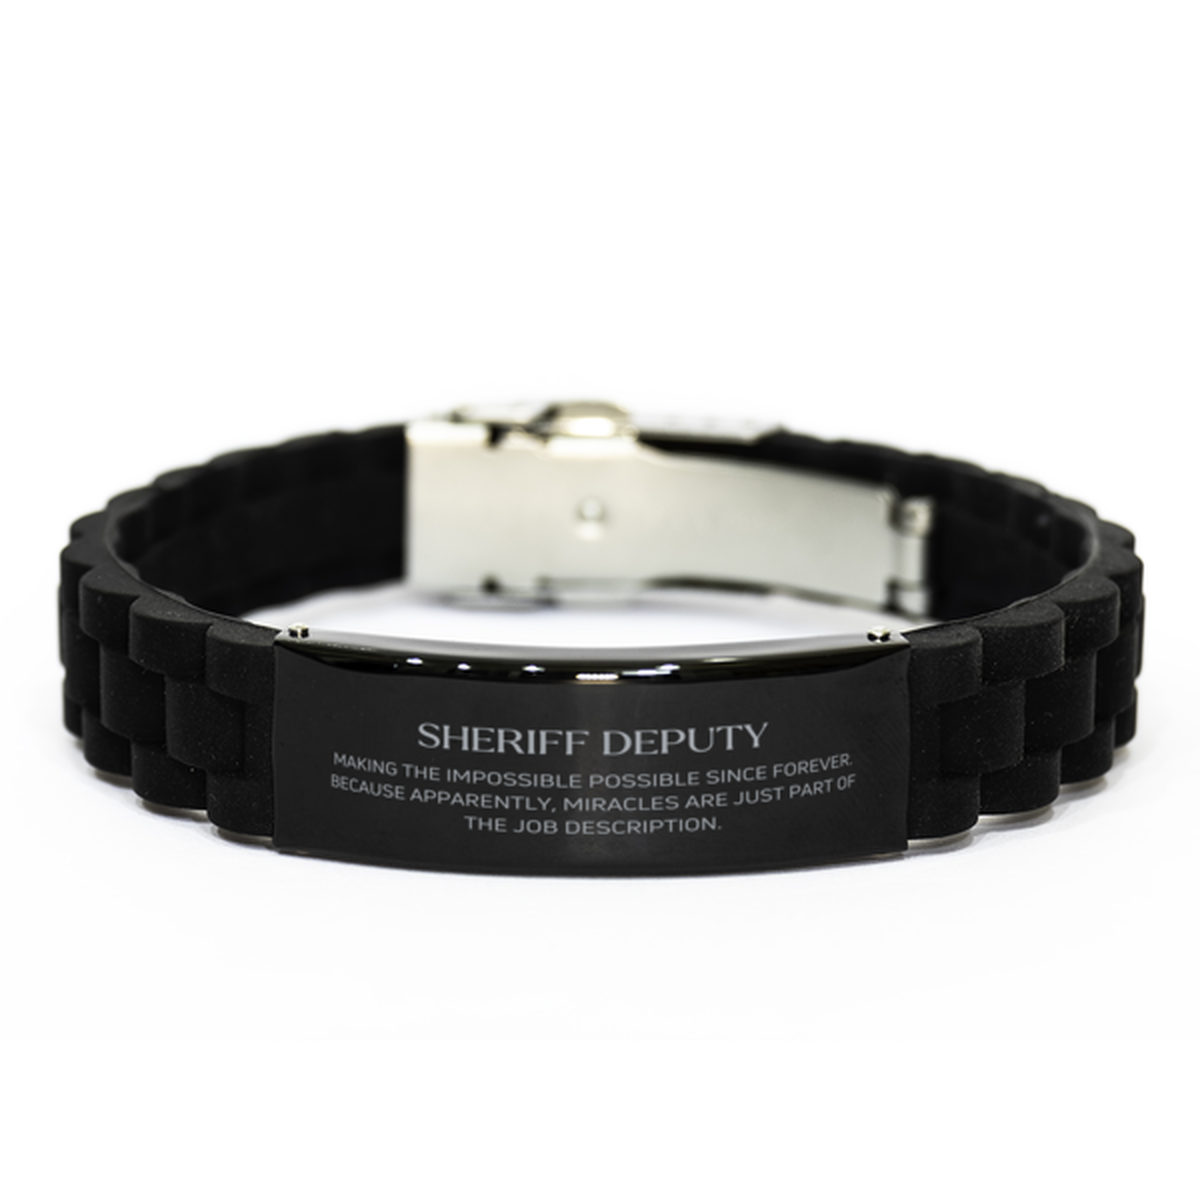 Funny Sheriff Deputy Gifts, Miracles are just part of the job description, Inspirational Birthday Black Glidelock Clasp Bracelet For Sheriff Deputy, Men, Women, Coworkers, Friends, Boss